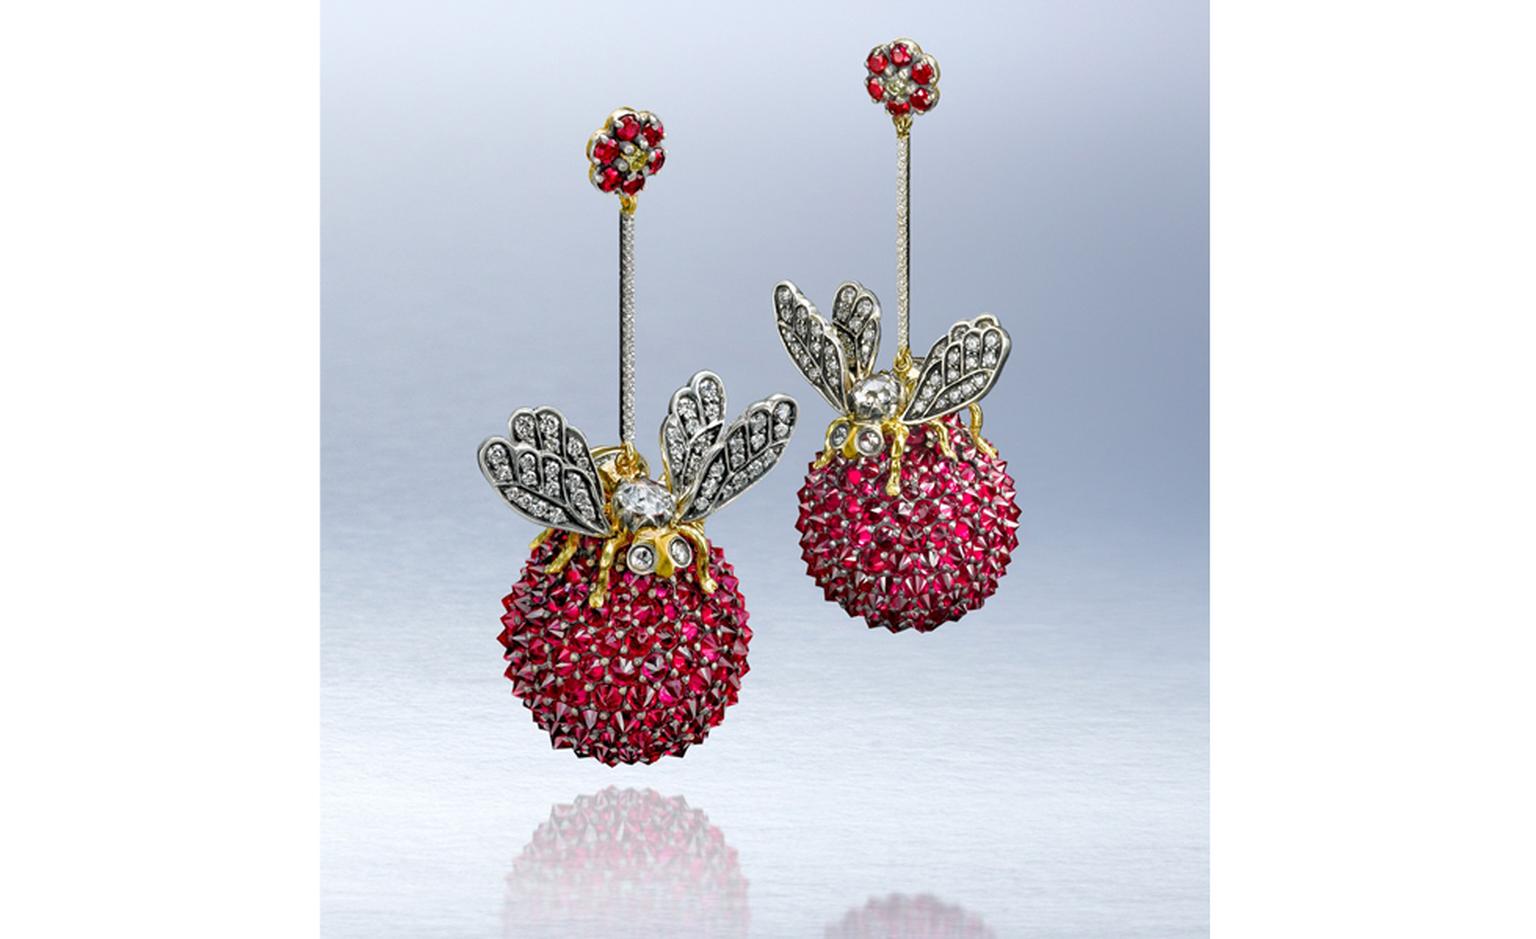 ARK, Bees on a Ruby Ball,  Earrings, 2008, rubies, diamonds, silver and 18 carat gold. POA.